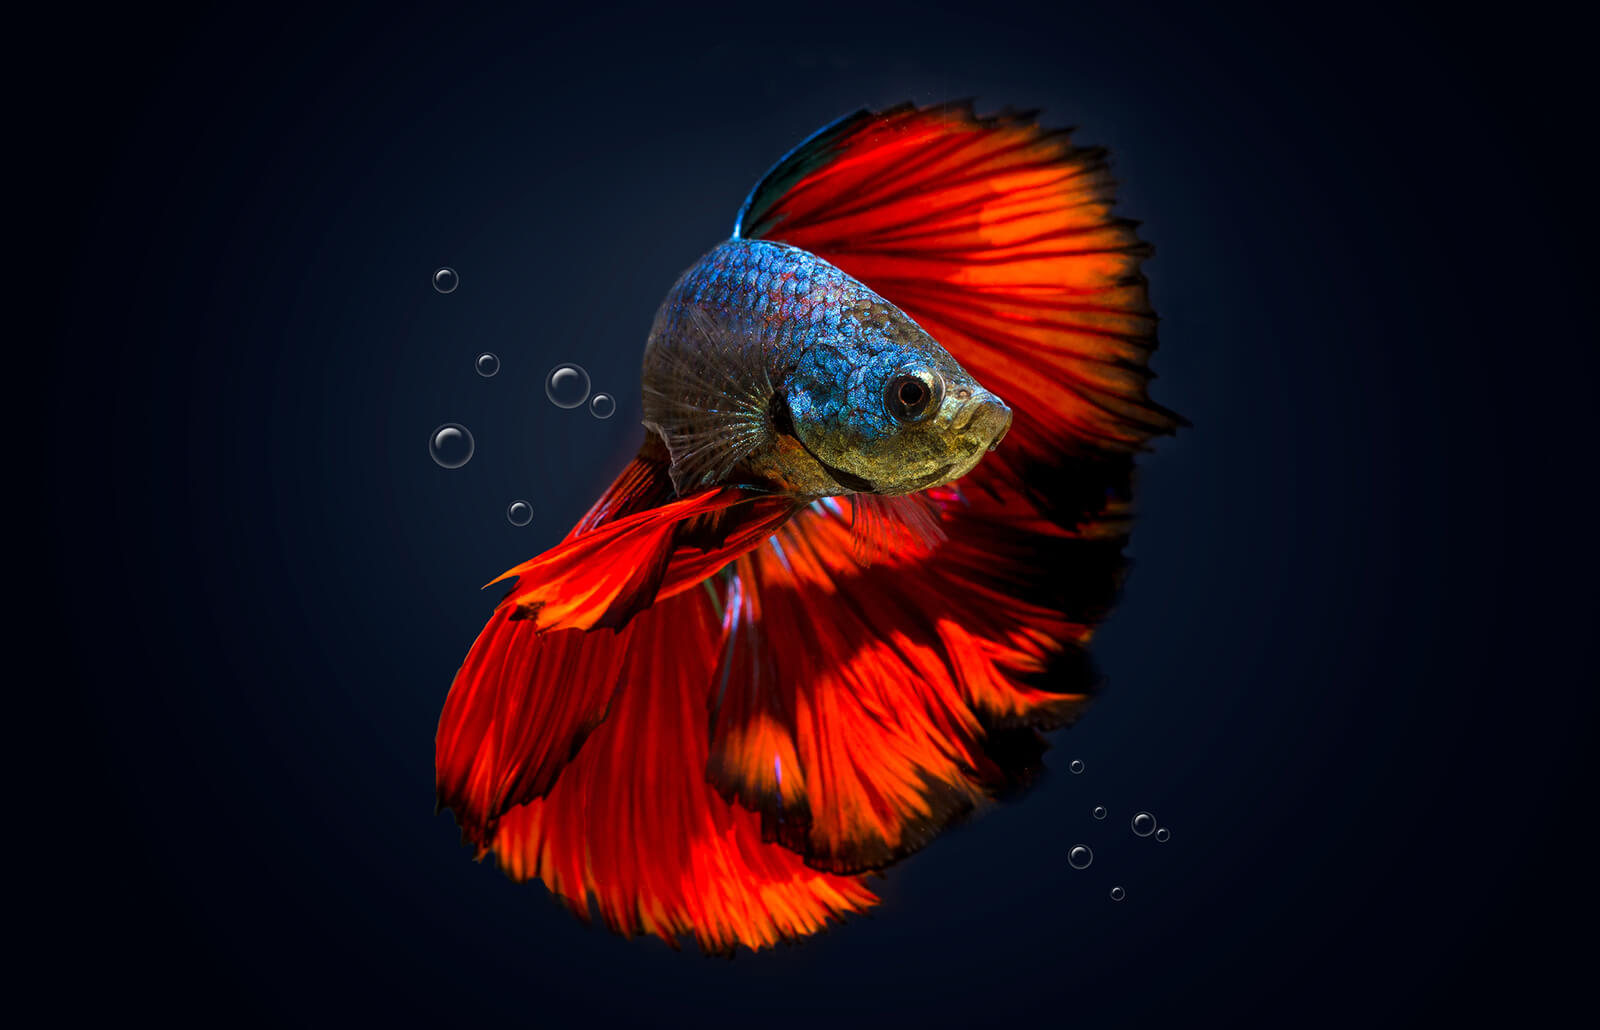 Angry betta fish flaring gills and spreading fins